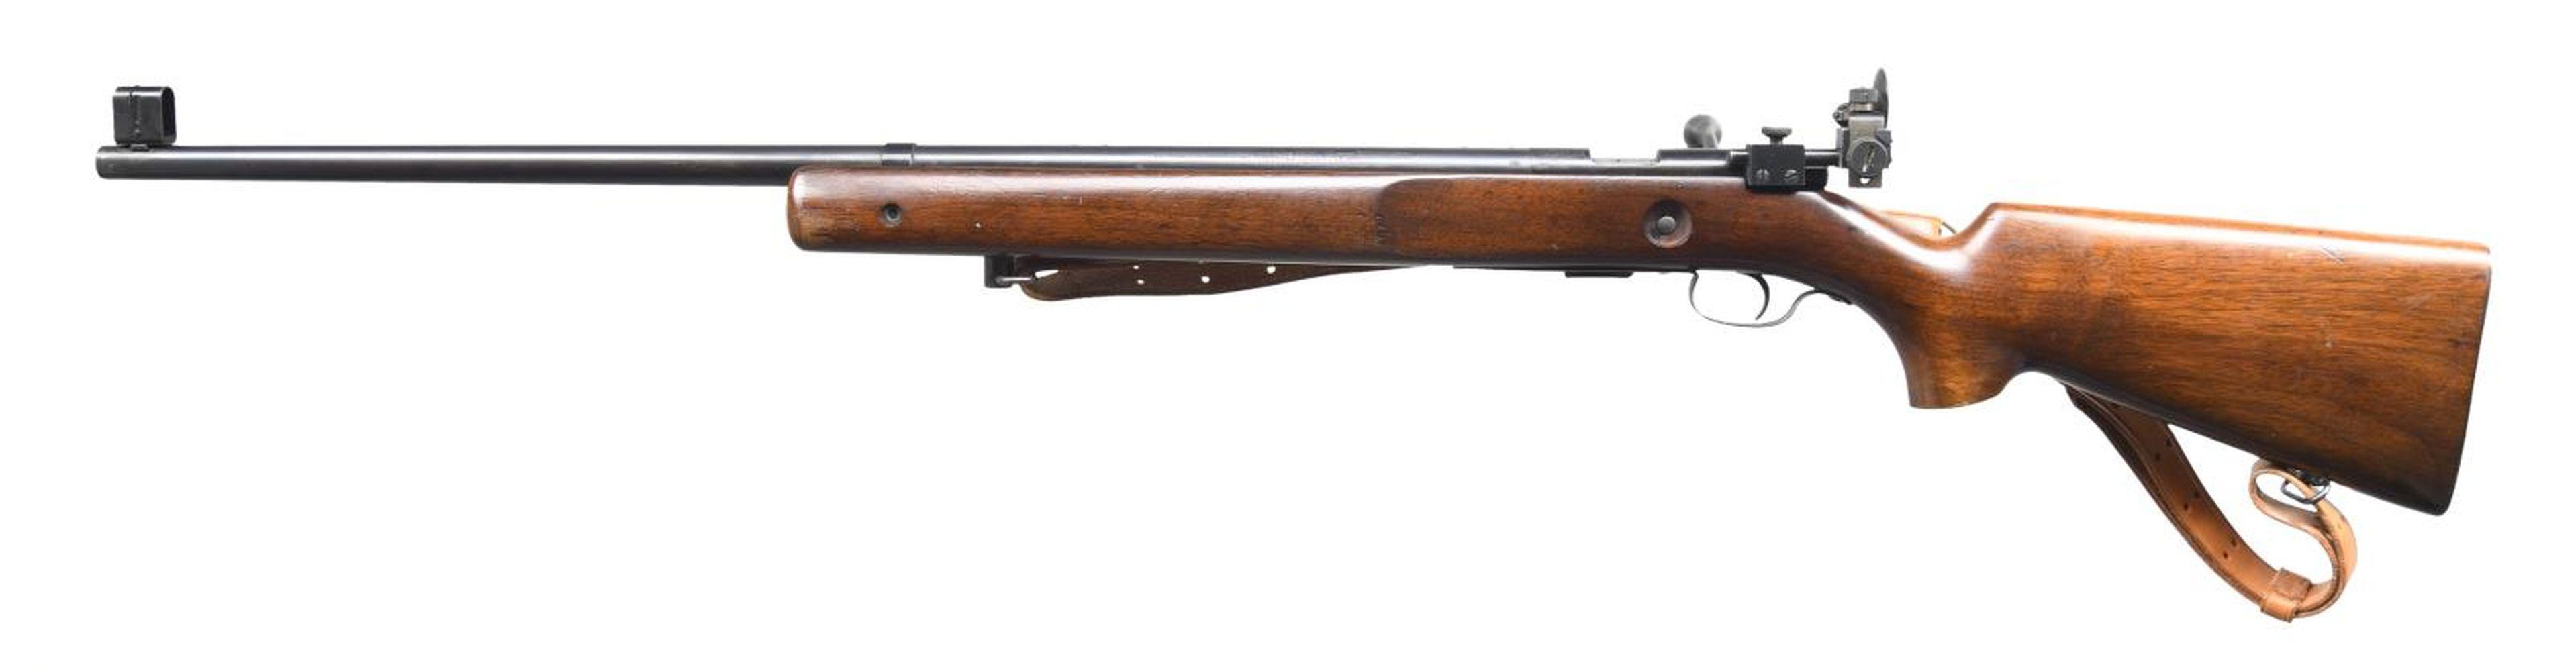 WINCHESTER MODEL 75 BOLT-ACTION TARGET RIFLE.